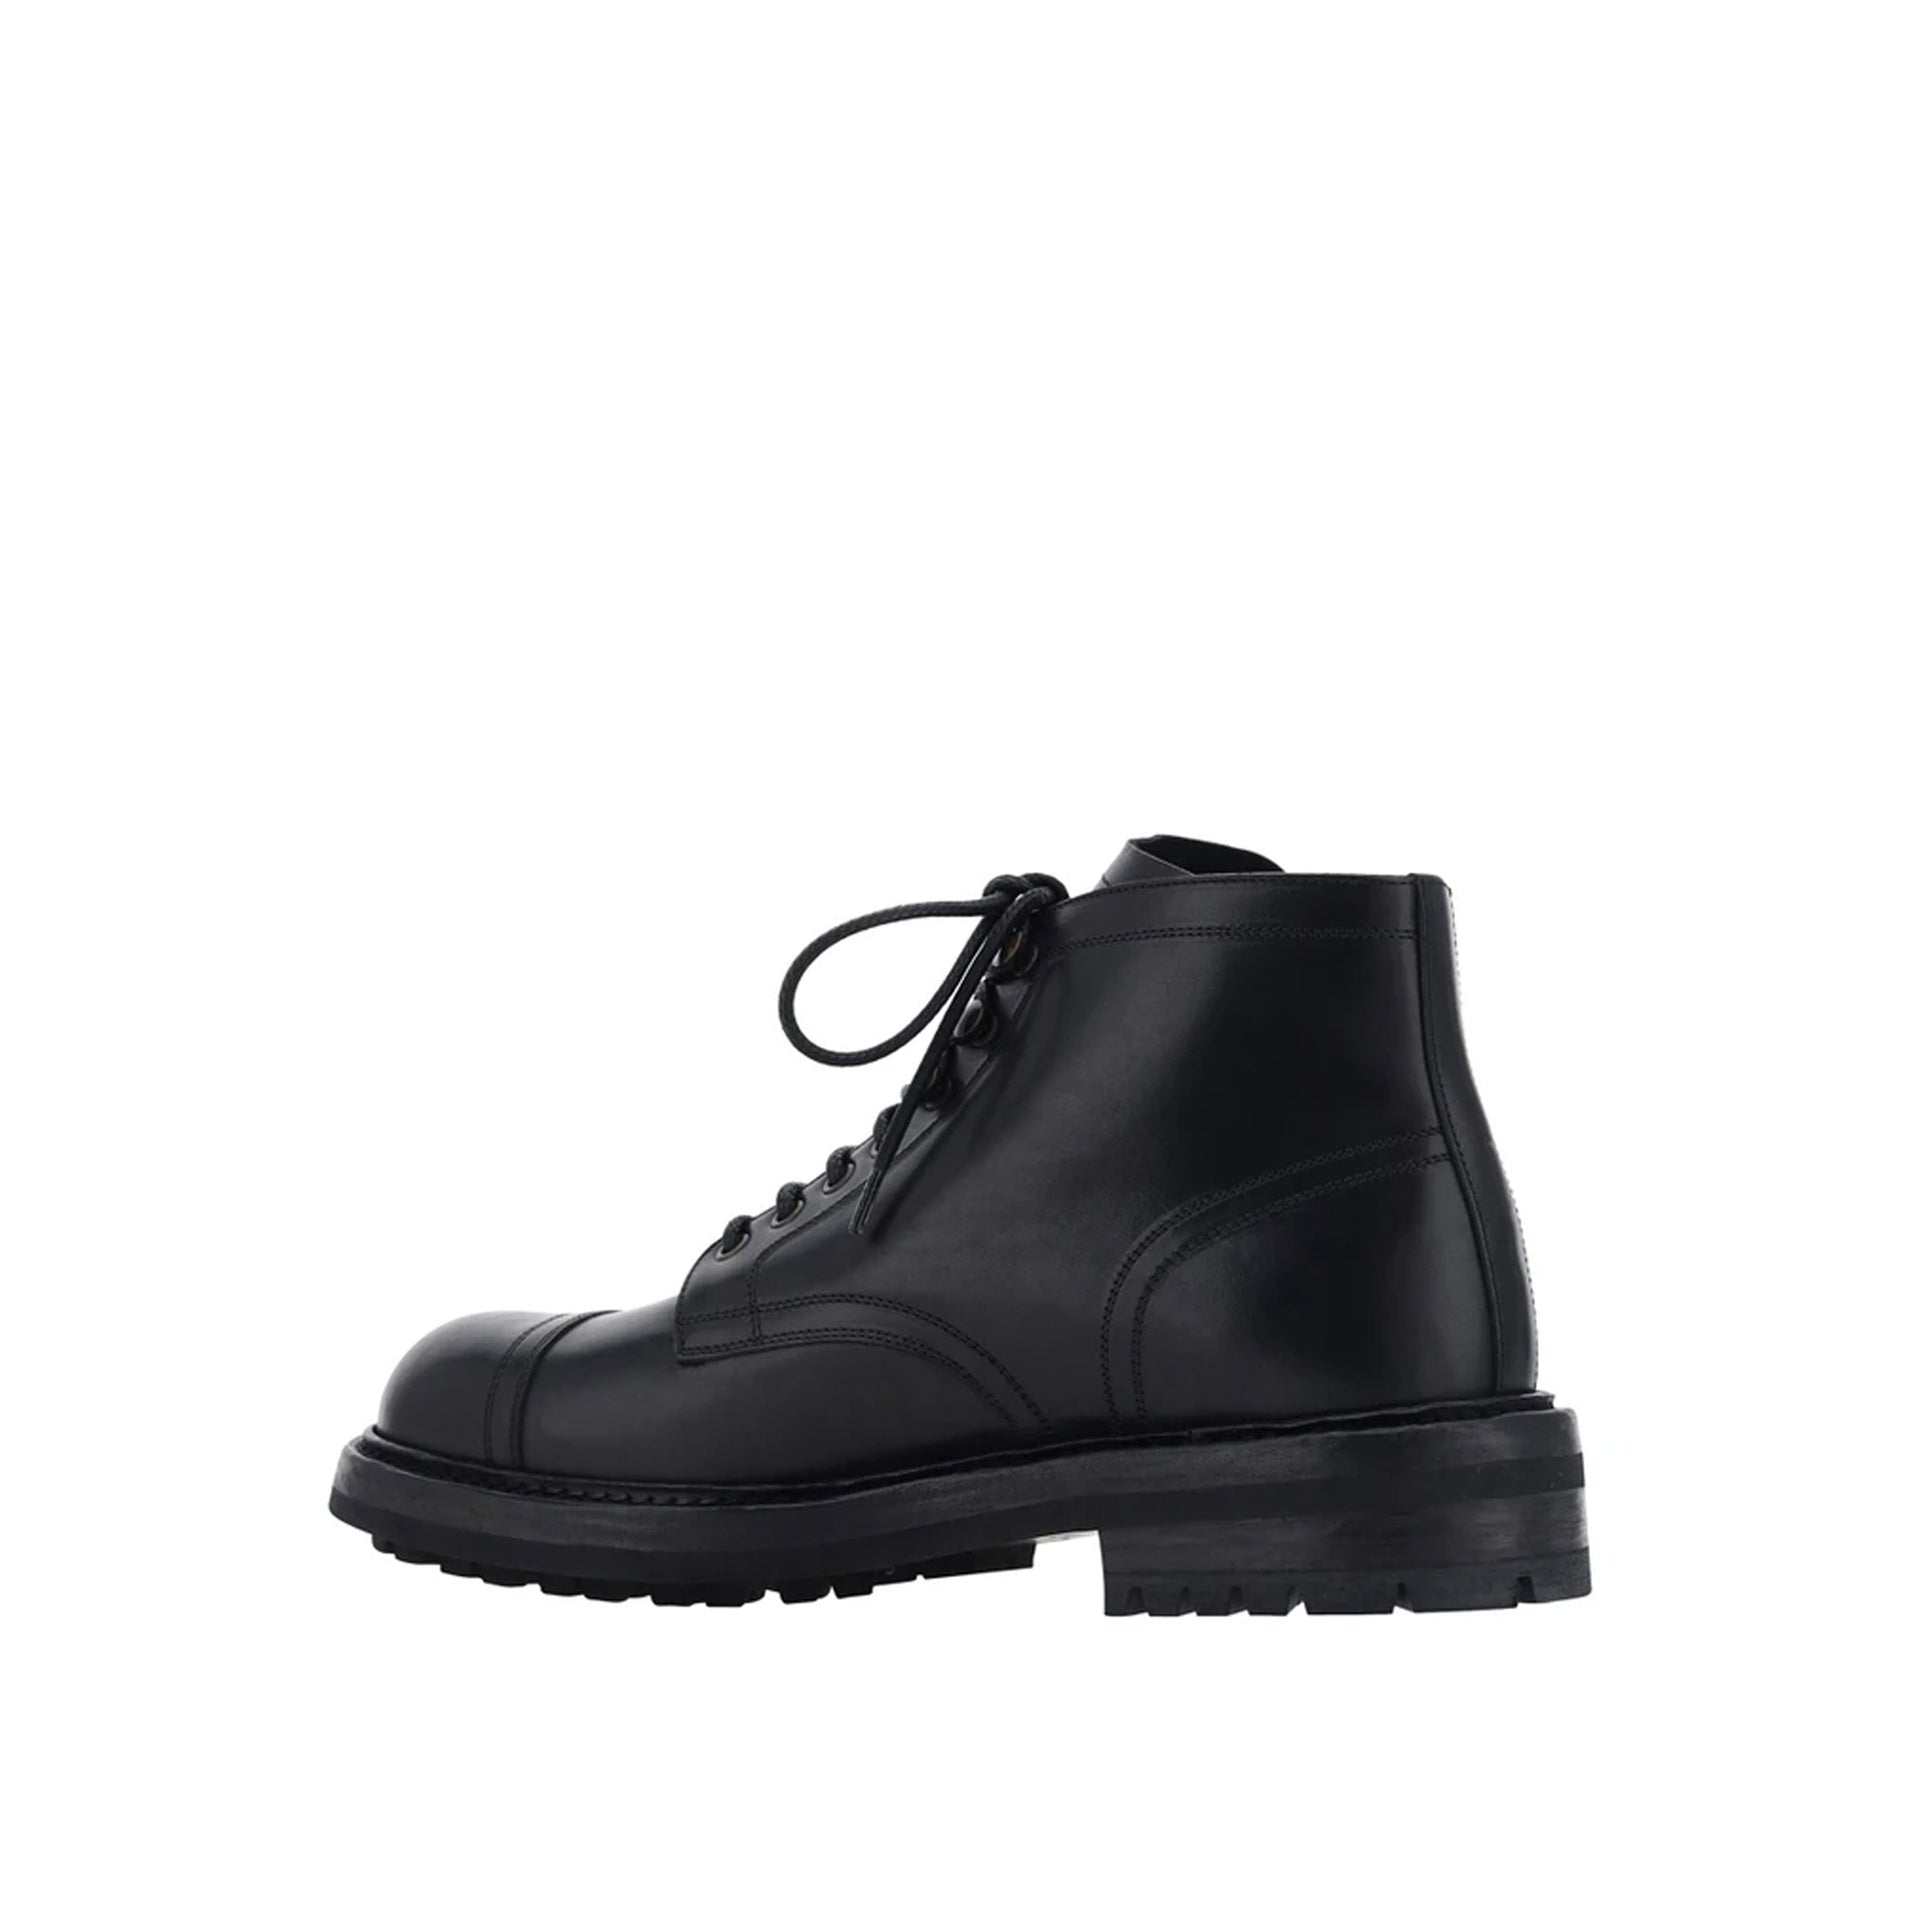 Dolce & Gabbana Lace-Up Leather Boots